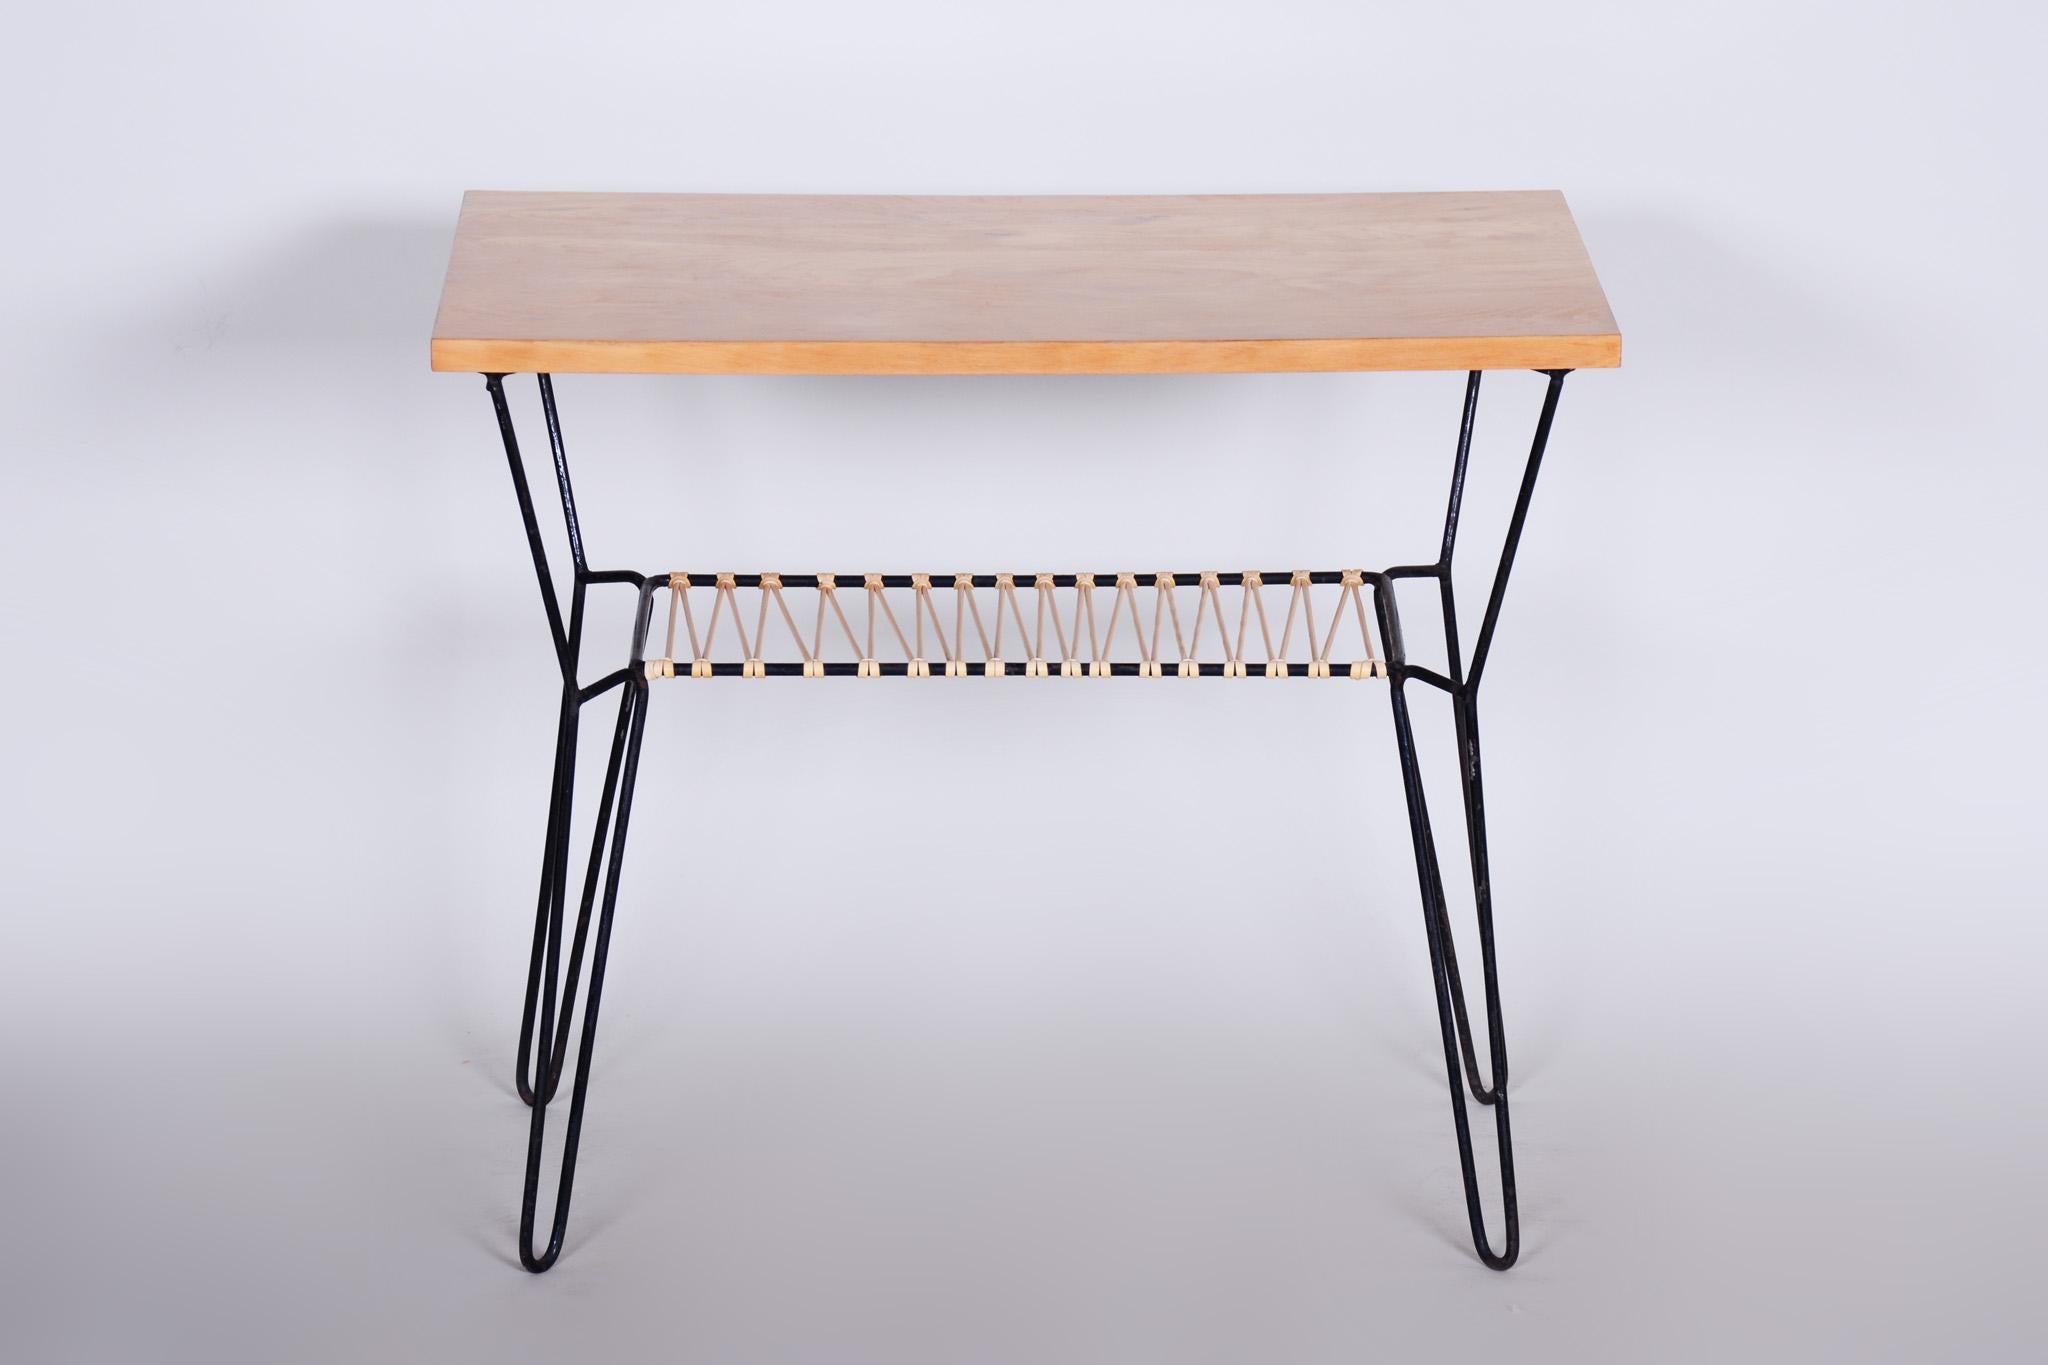 Midcentury stool and table.
Original well preserved condition.
Period: 1950-1959
Source: Czechia (Czechoslovakia)
Material: Beech and lacquered steel

Table dimensions:
Height 56 cm (22.05 in)
Width 70 cm (27.56 in)
Depth 45 cm (17.72